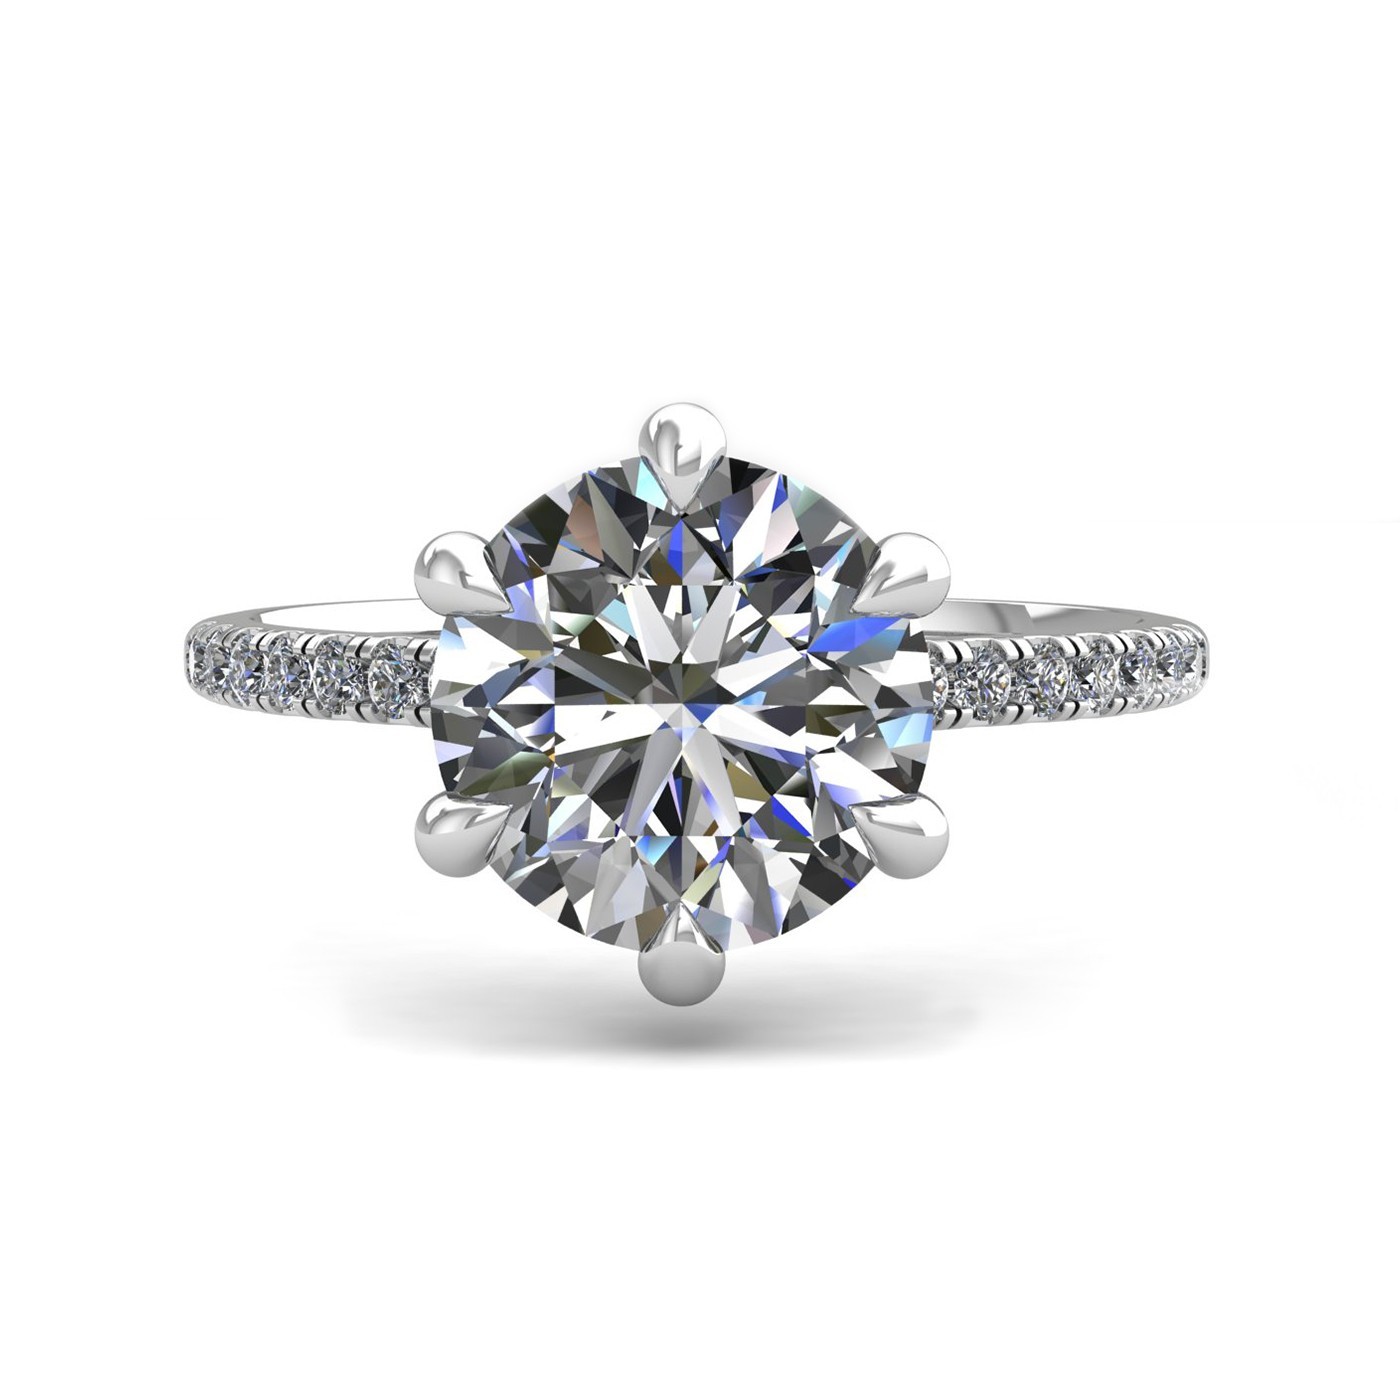 18k white gold 1,00 ct 6 prongs round cut diamond engagement ring with whisper thin pavÉ set band Photos & images